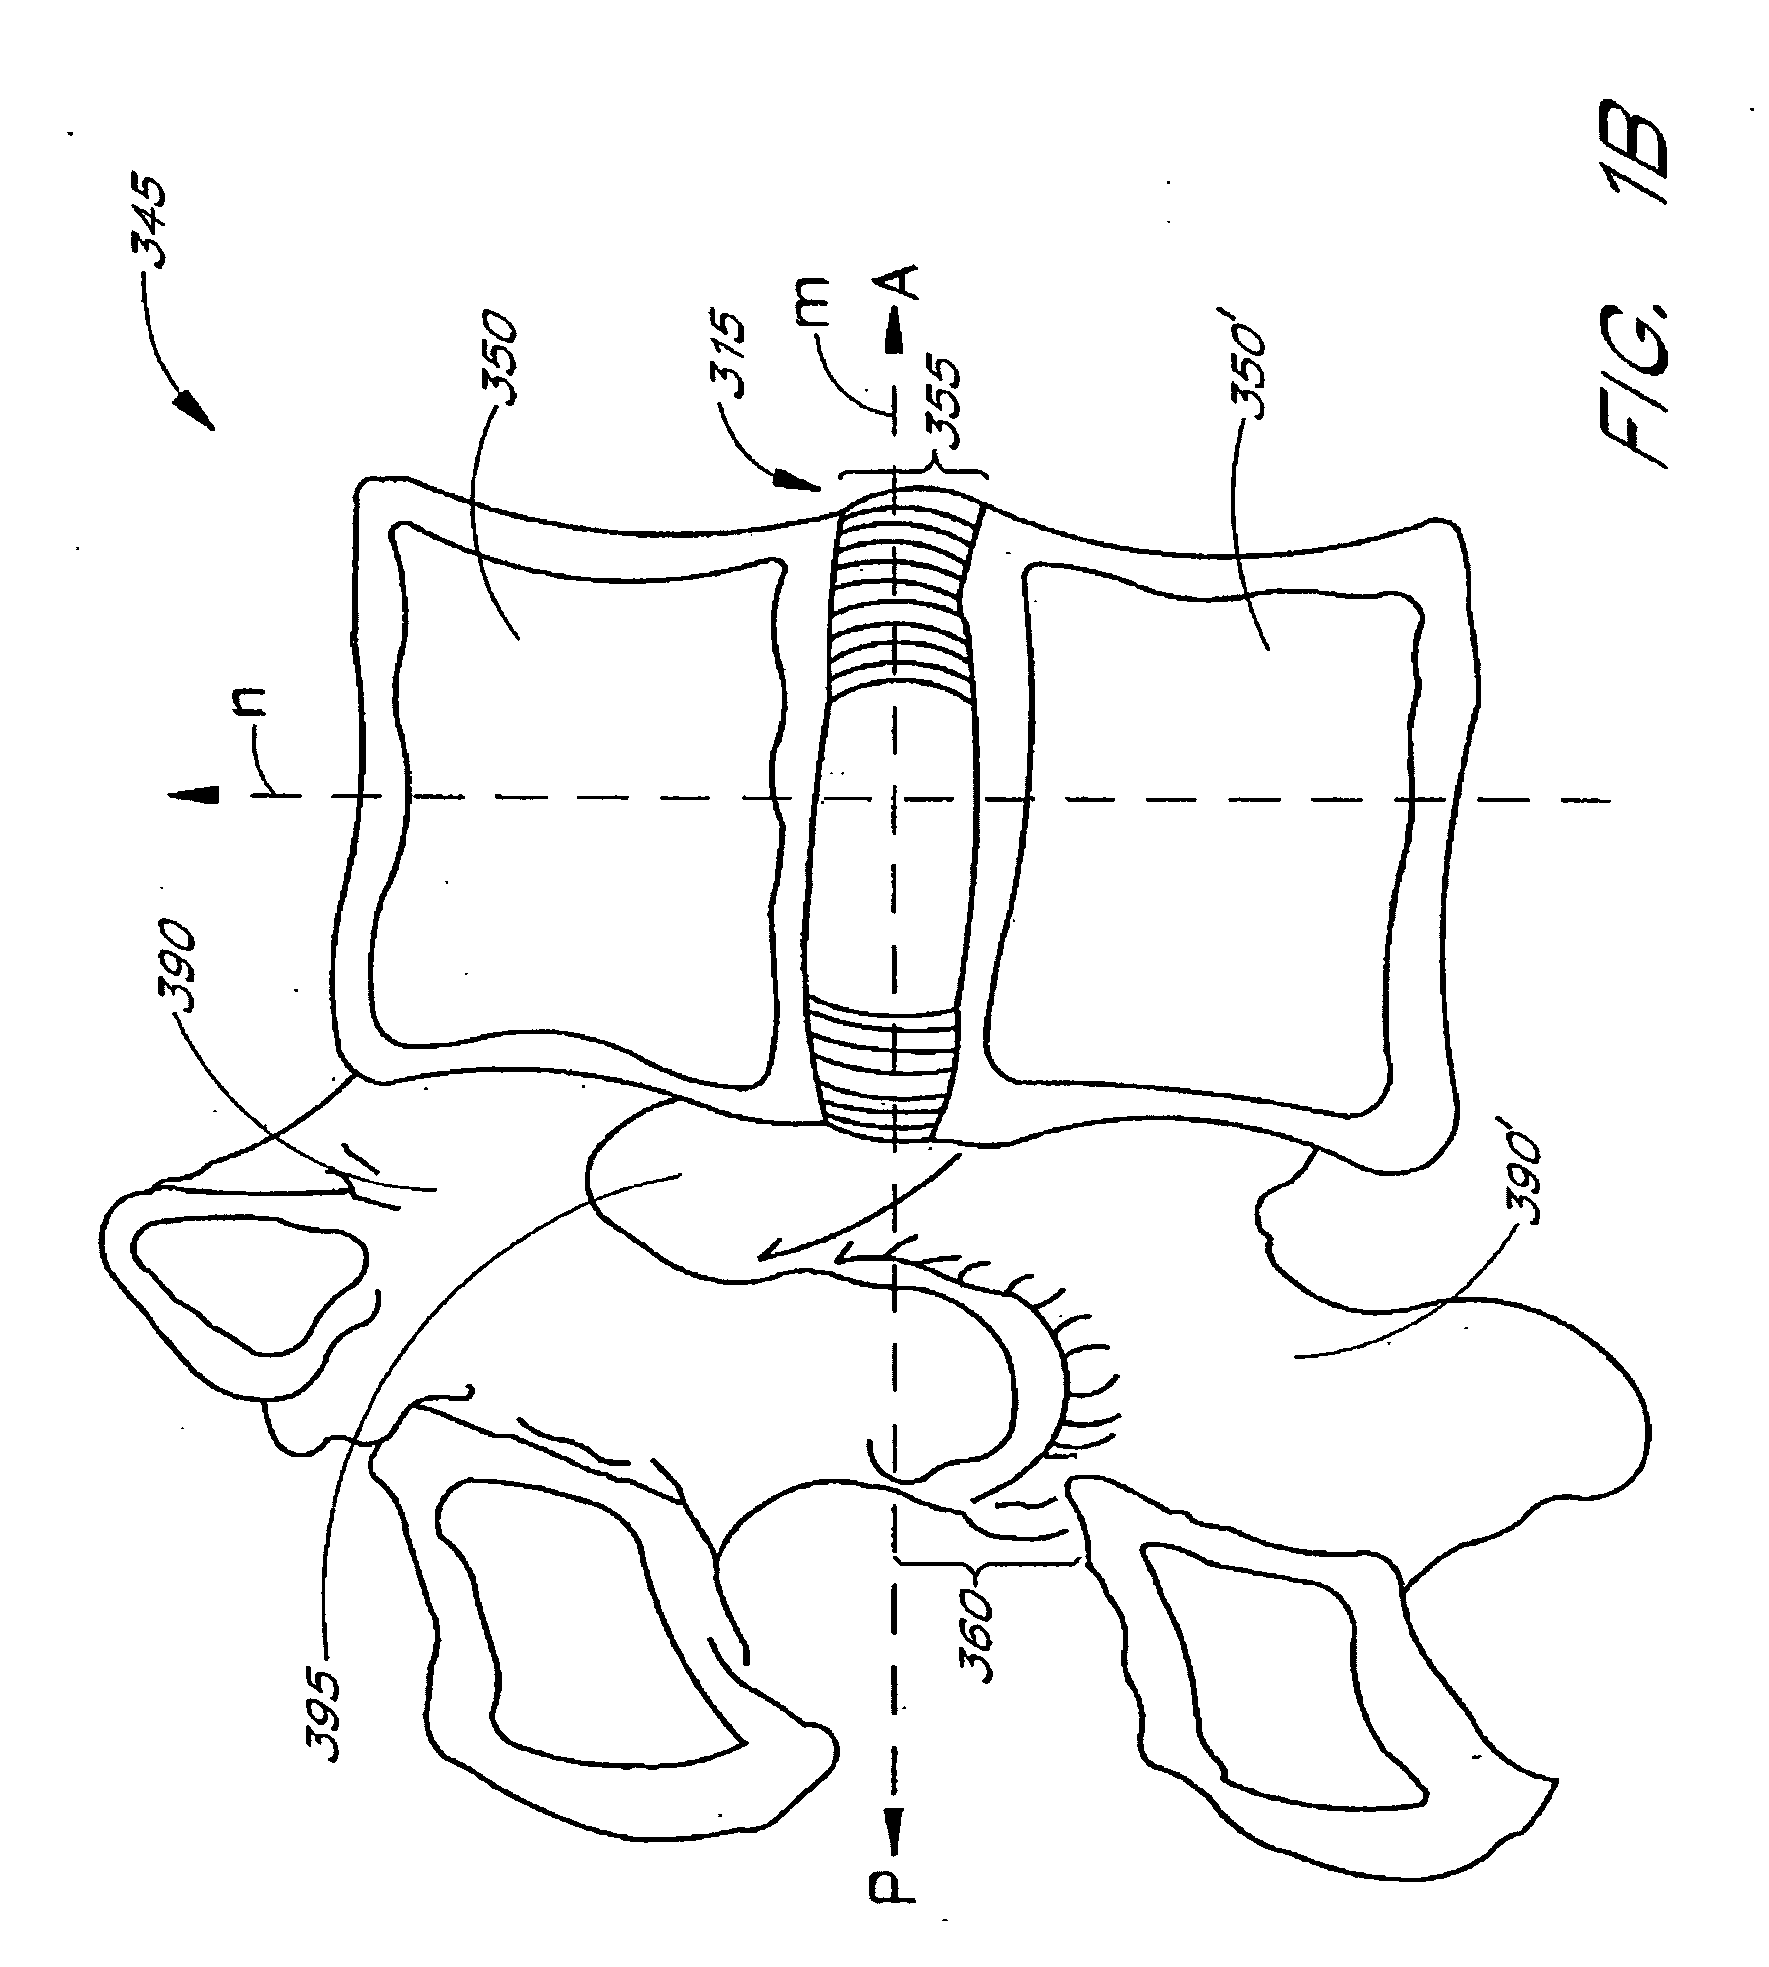 Method of performing a procedure within a disc